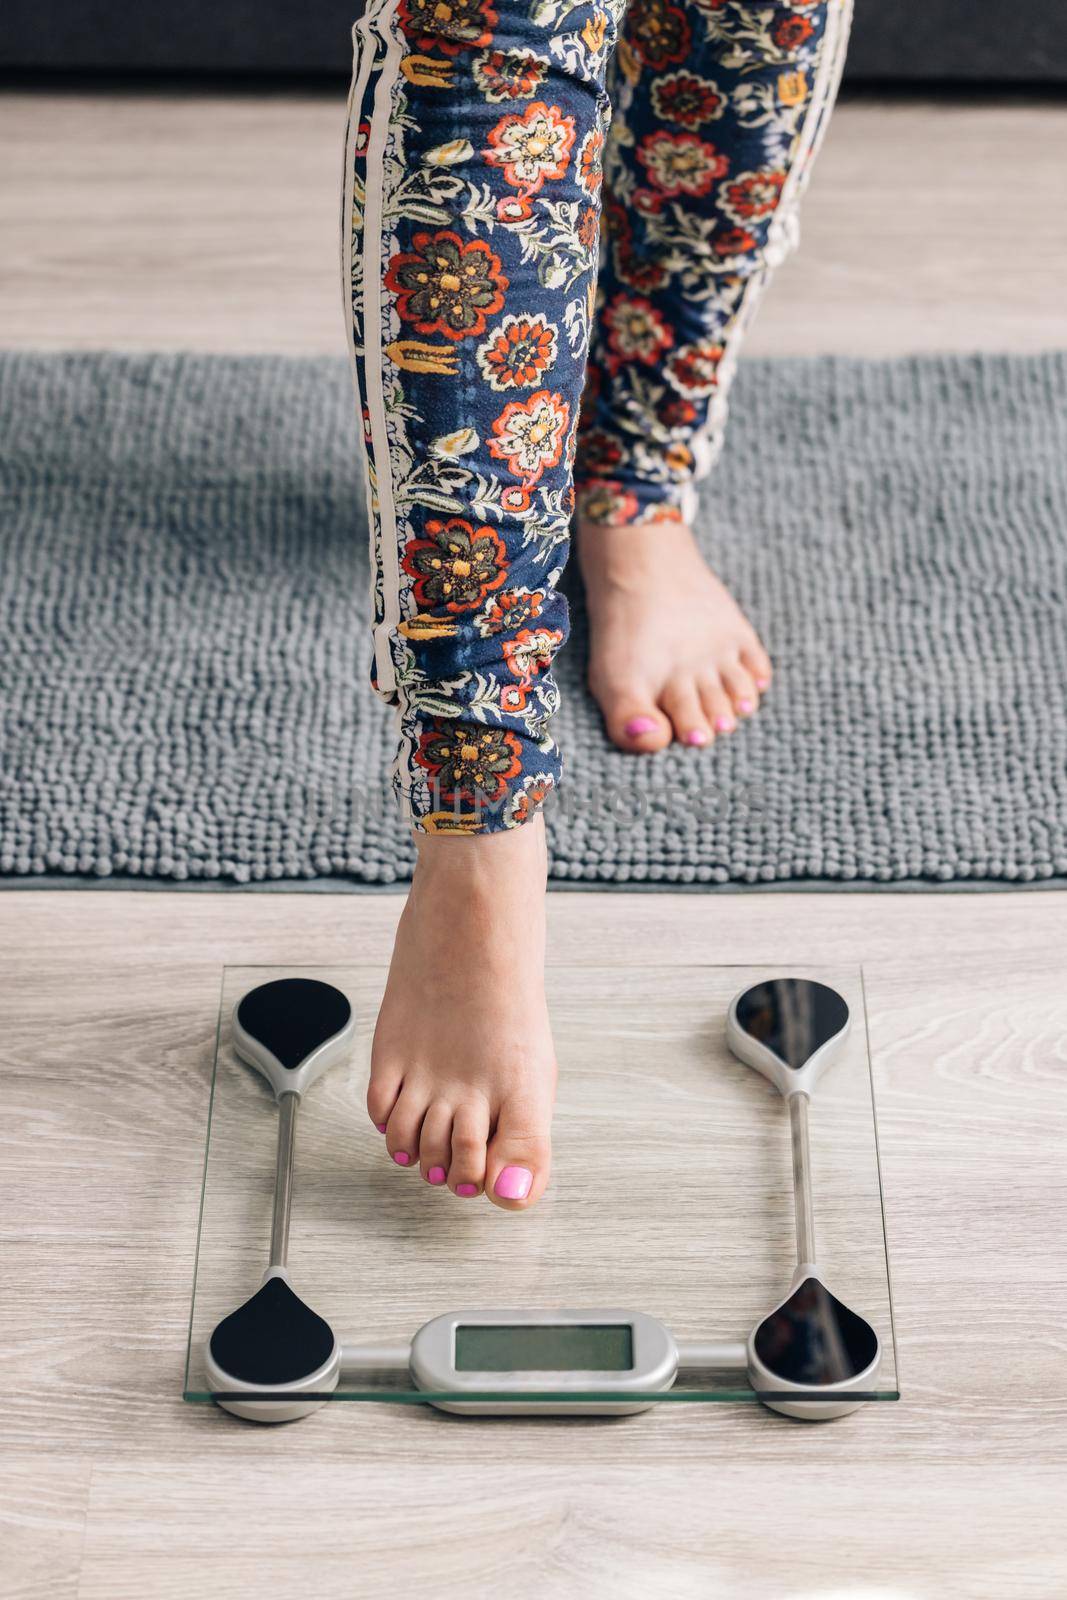 Female feet step on floor scales close up. Woman measuring her body weight by standing on electronic bathroom scale indoors. Girl checks his weight after training at home by uflypro